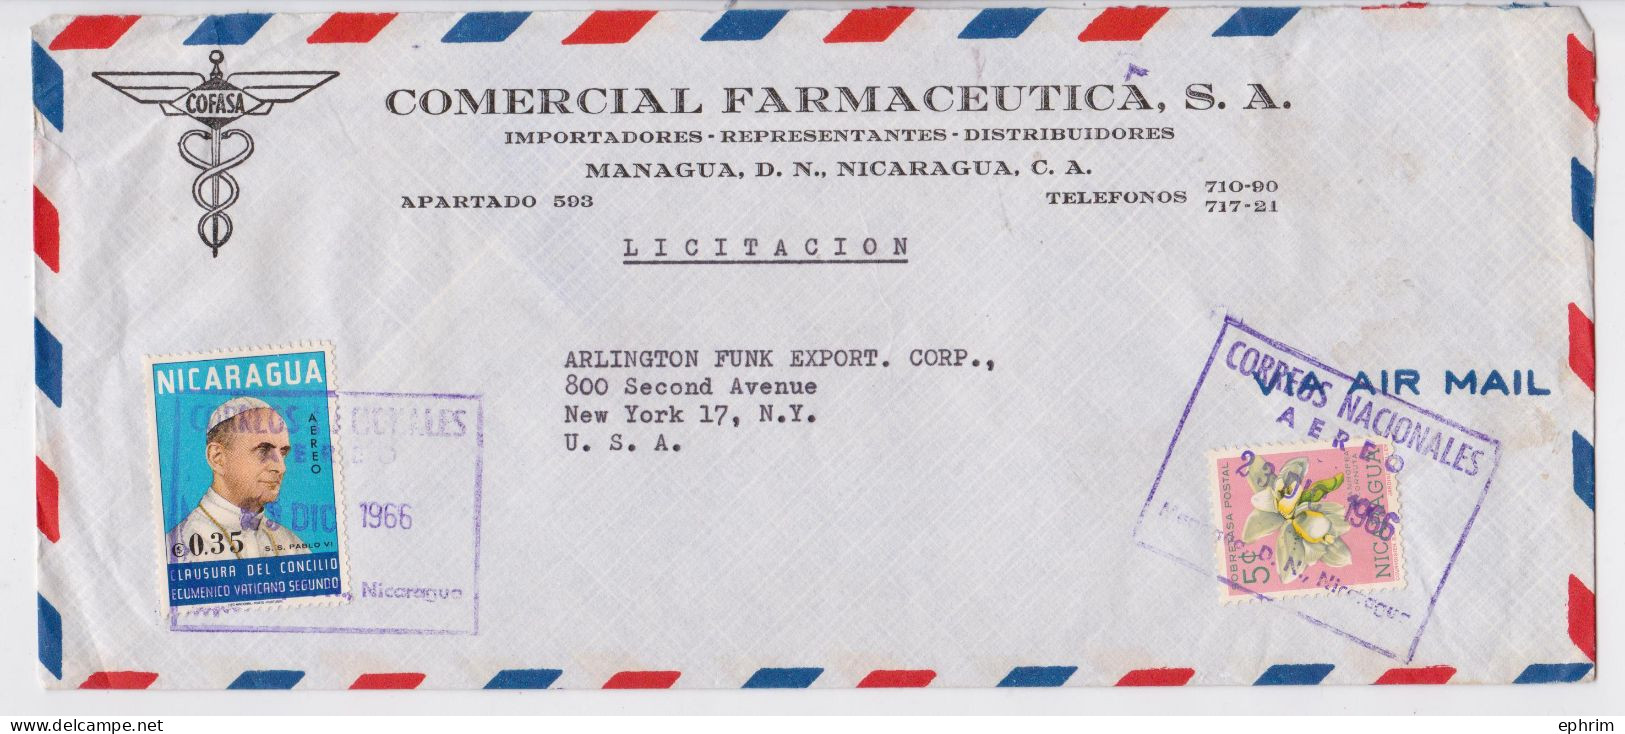 Nicaragua Lettre Timbre Pape Pope Pablo VI Stamp Air Mail Cover Sello Correo Aereo 1966 - Nicaragua